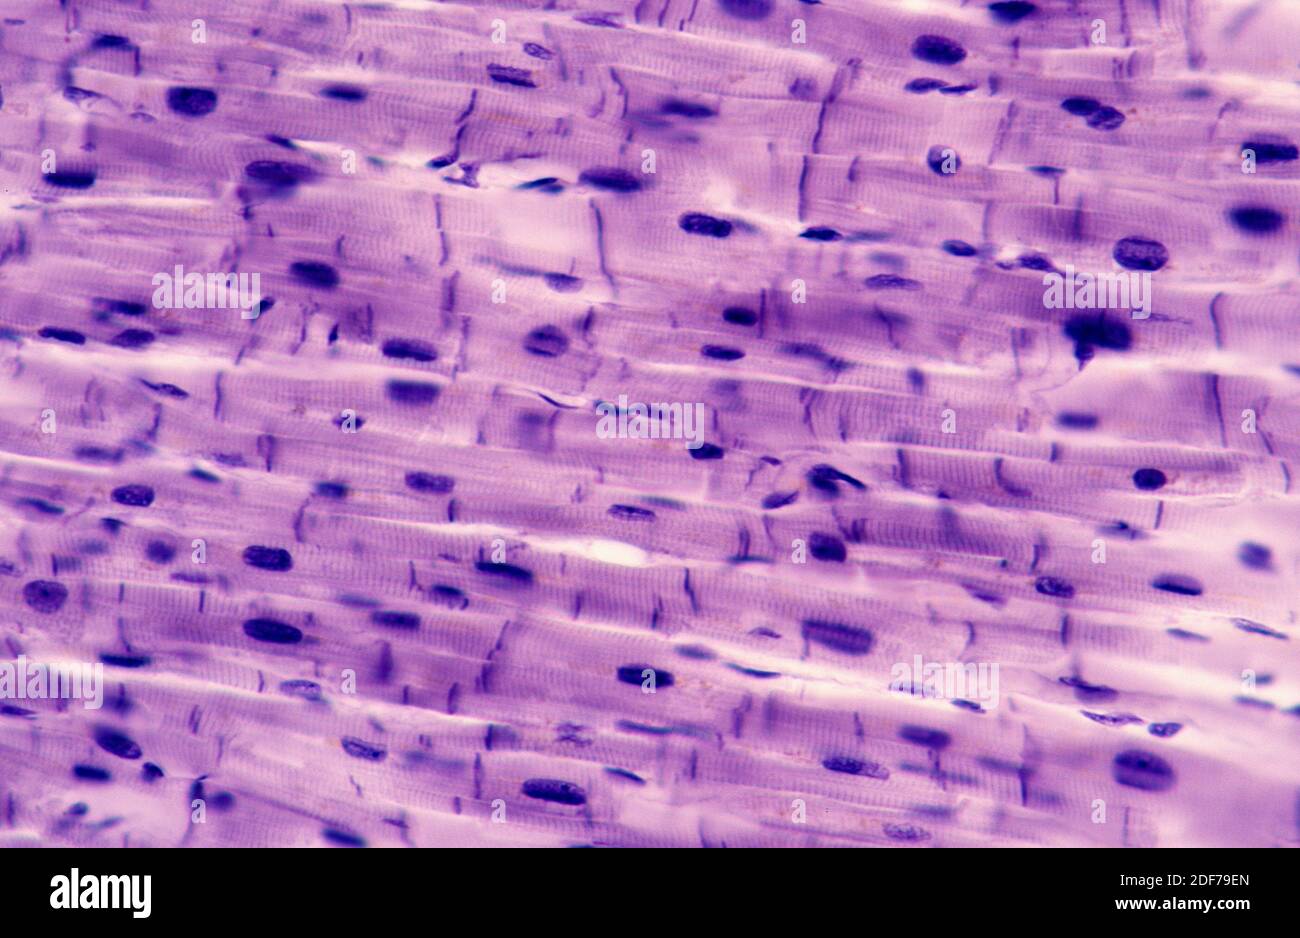 Cardiac muscle showing cells, nucleous and sarcomeres. Photomicrograph. Stock Photo